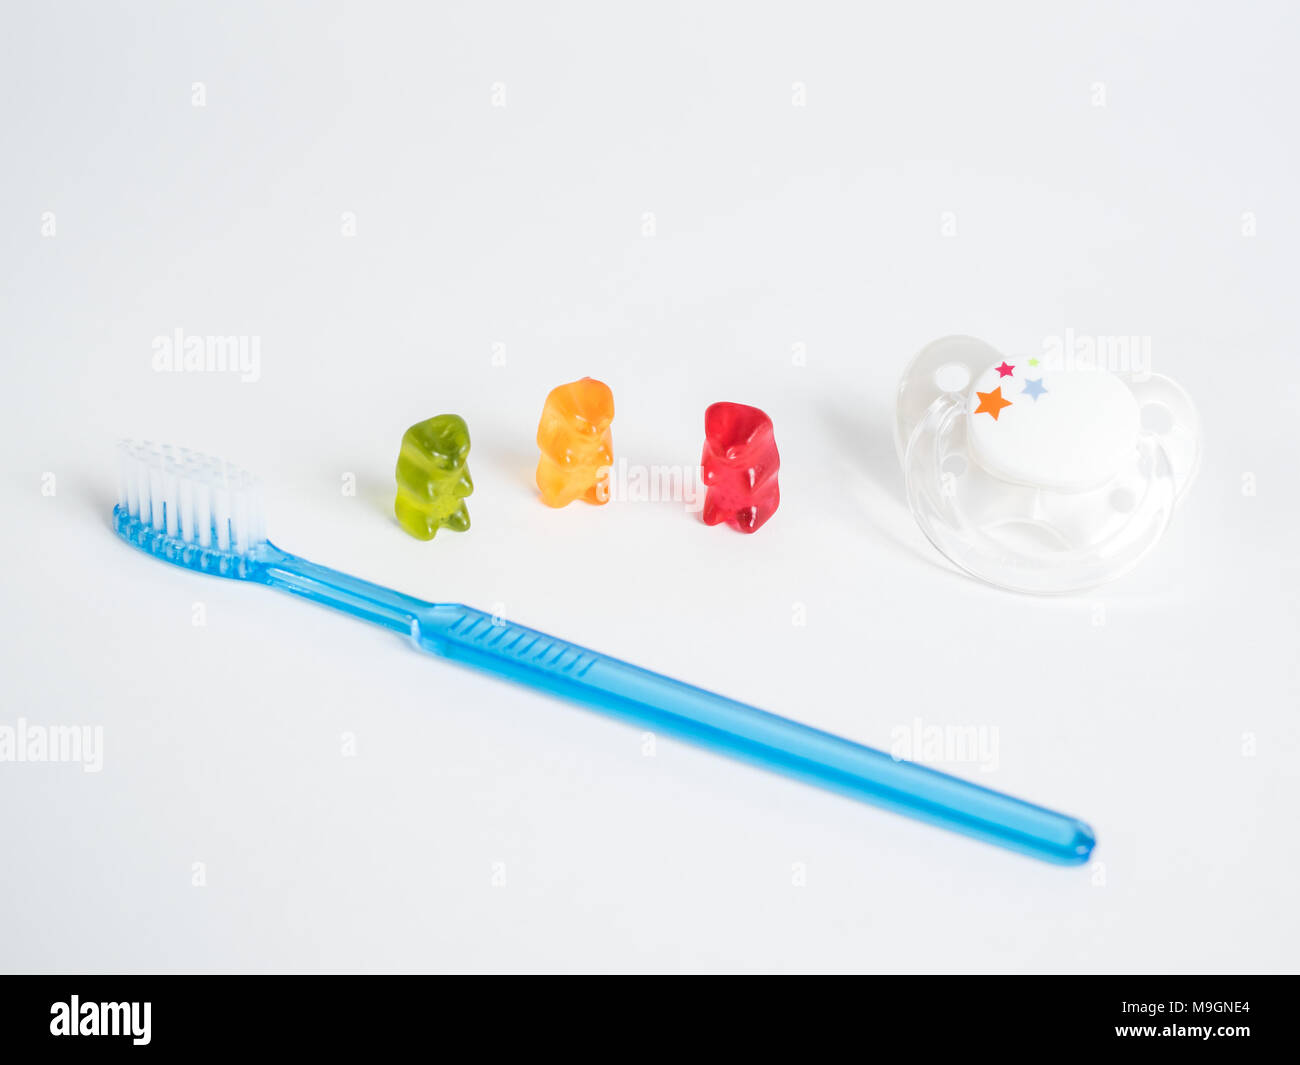 Three gummy bears, a pacifier and a blue toothbrush against a white background Stock Photo